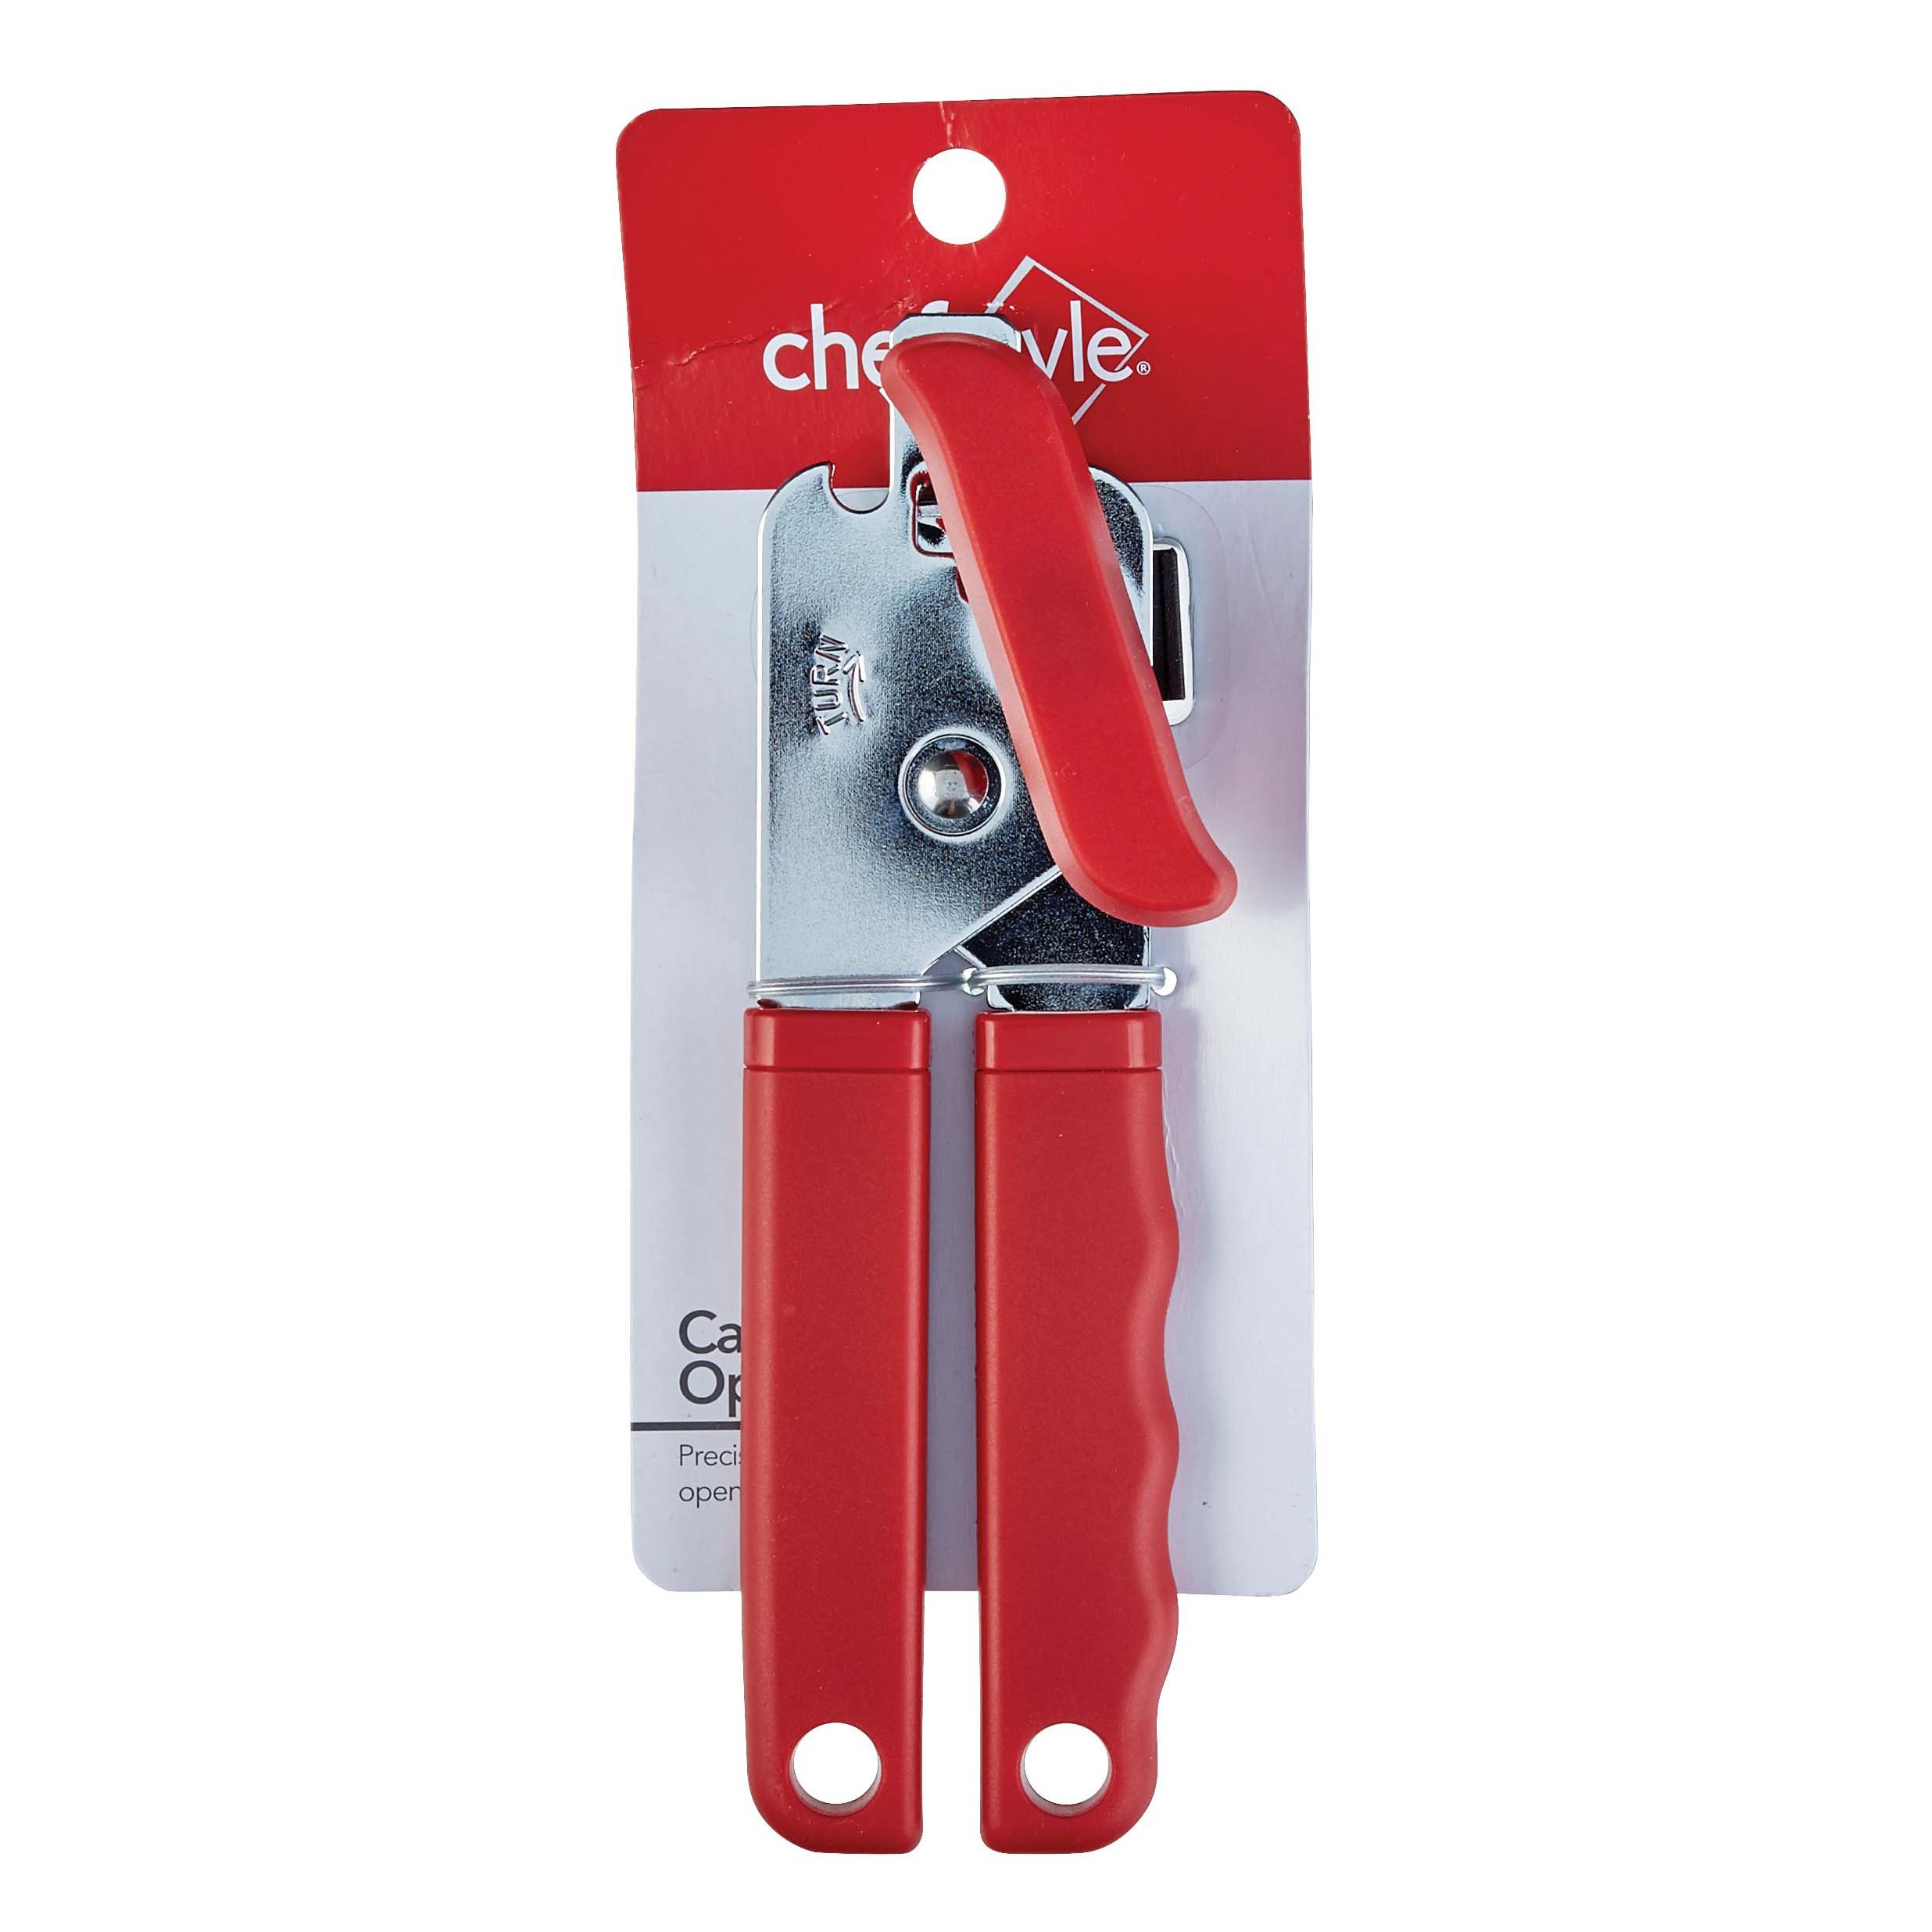 Classic Chrome Heavyweight Can Opener - Red - 76388R